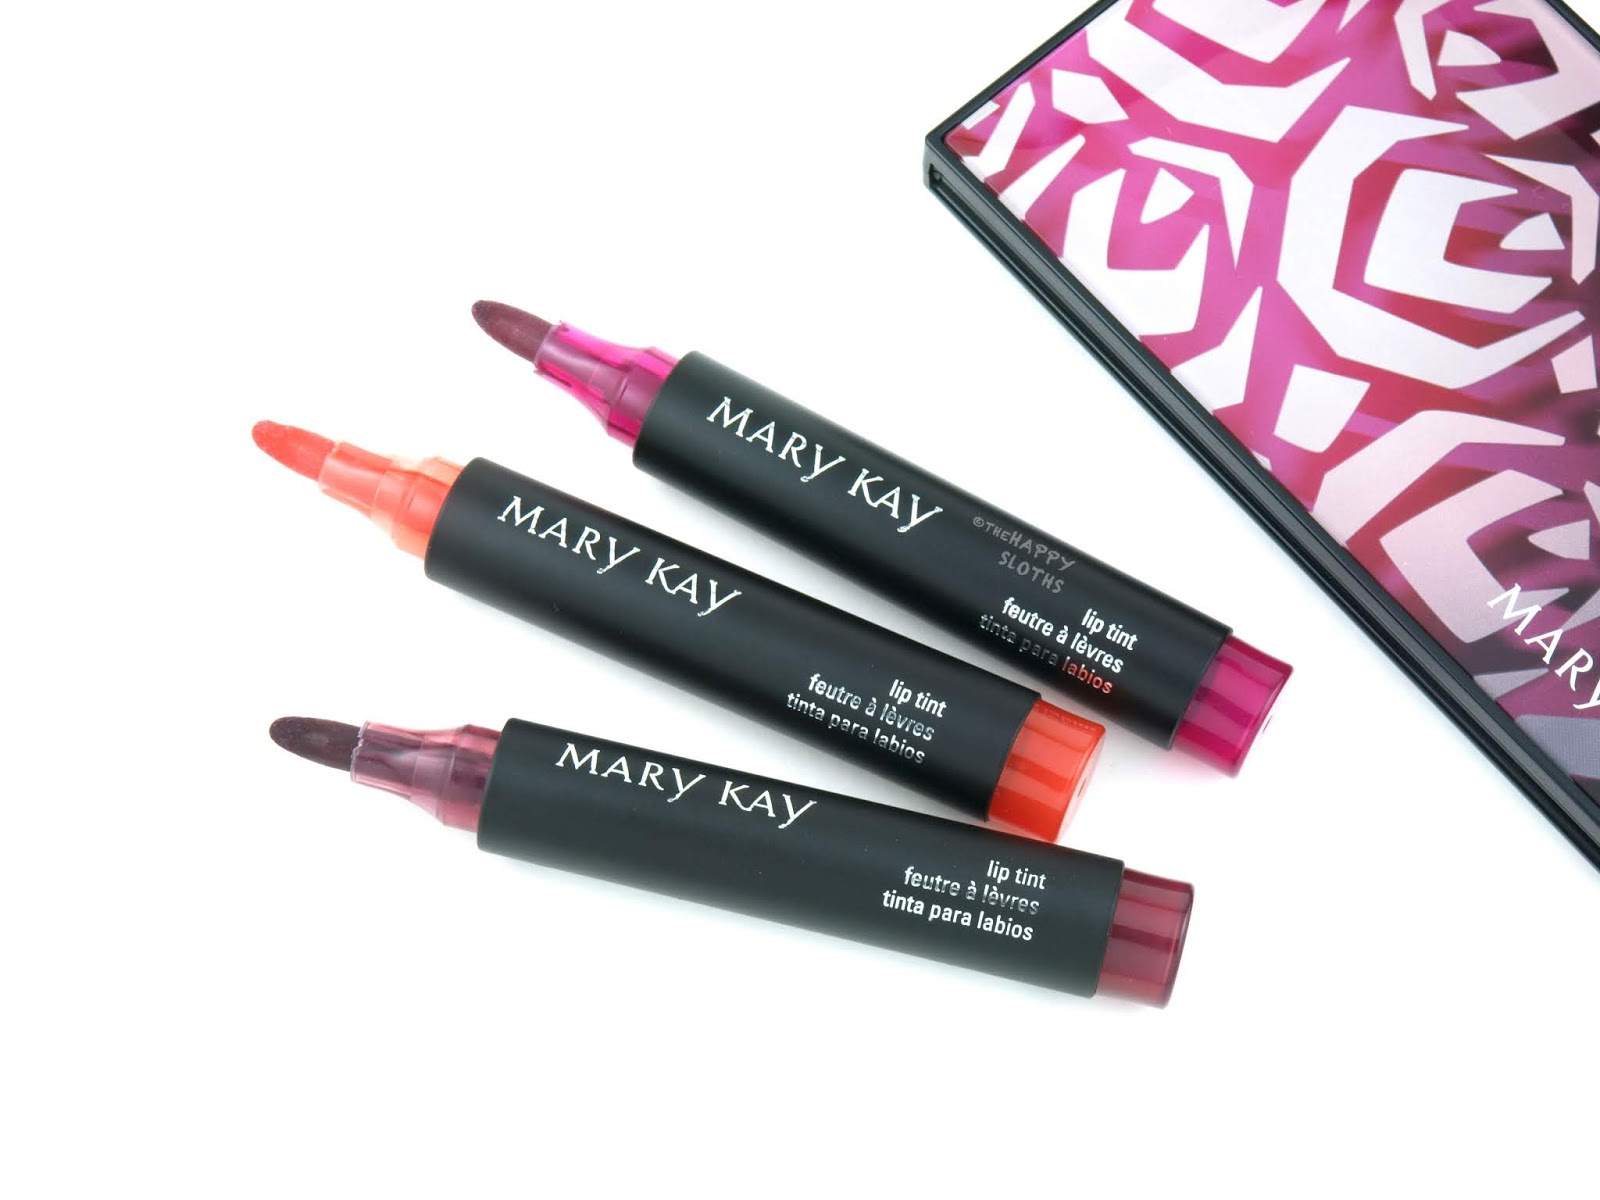 Mary Kay | Spring 2019 Lip Tint: Review and Swatches